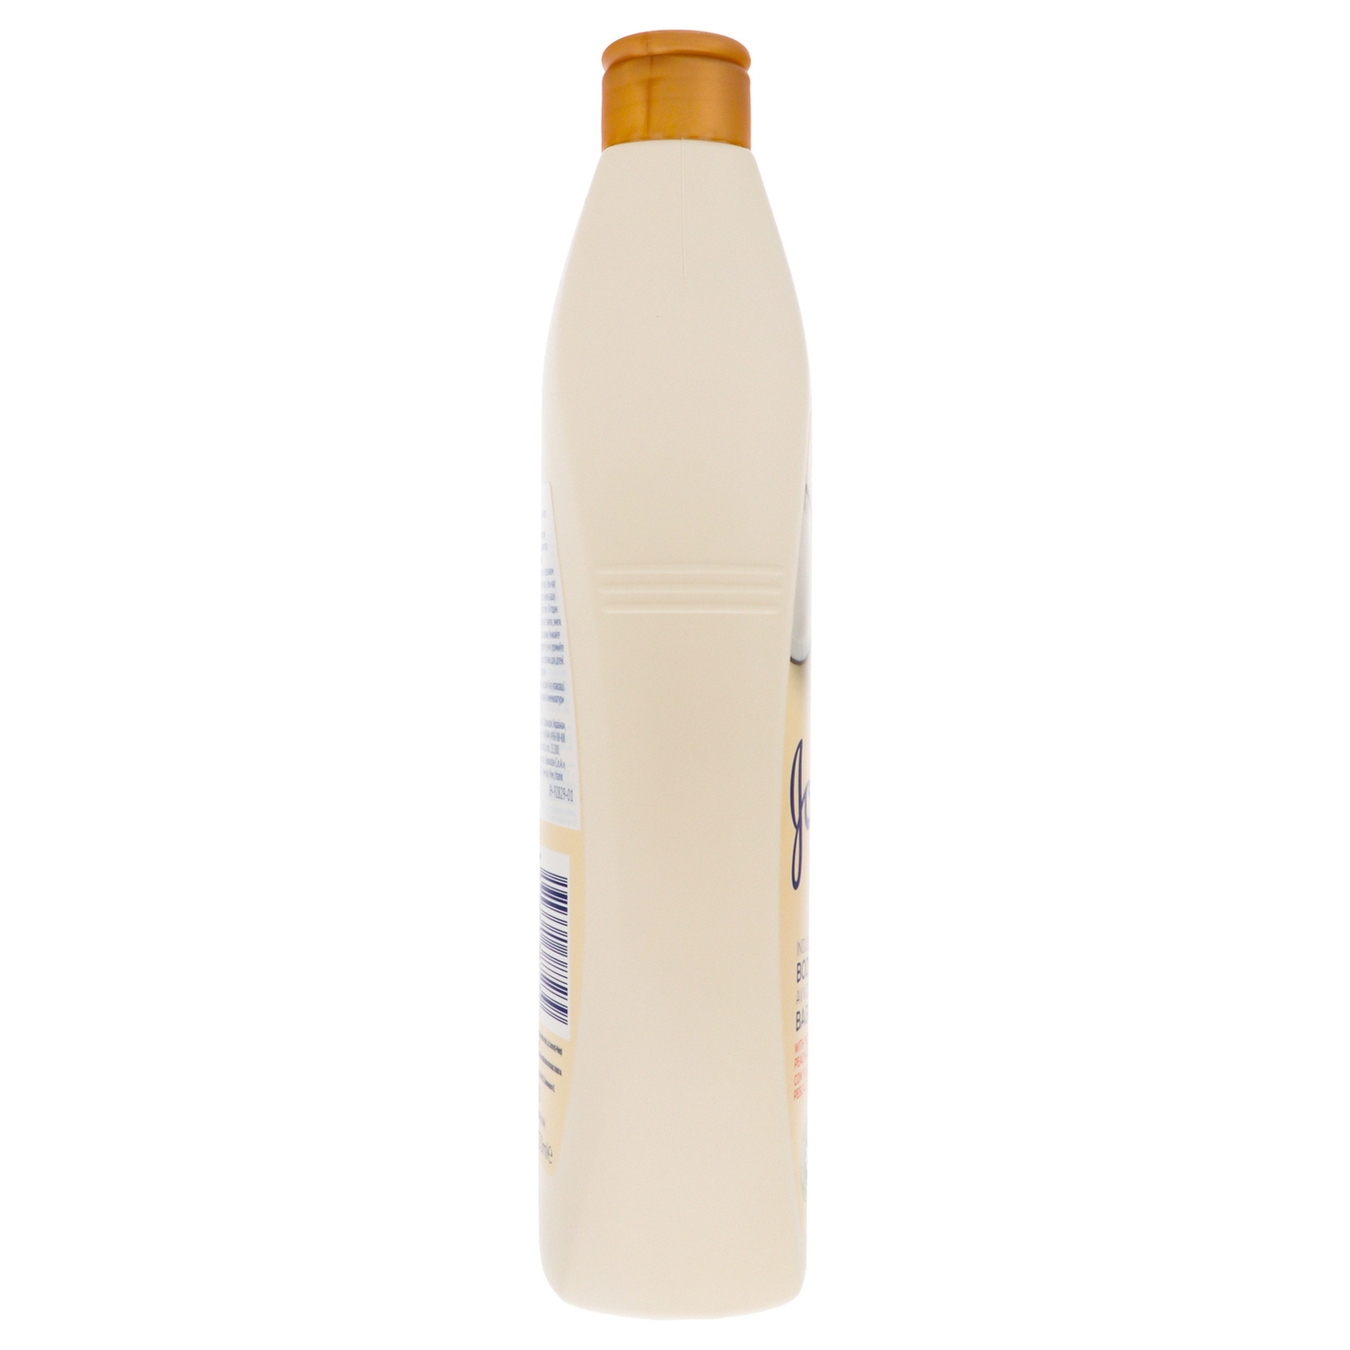 Shower gel Johnson's Vita-Rich Smoothie Relaxing with coconut yogurt and peach extract 750ml 3